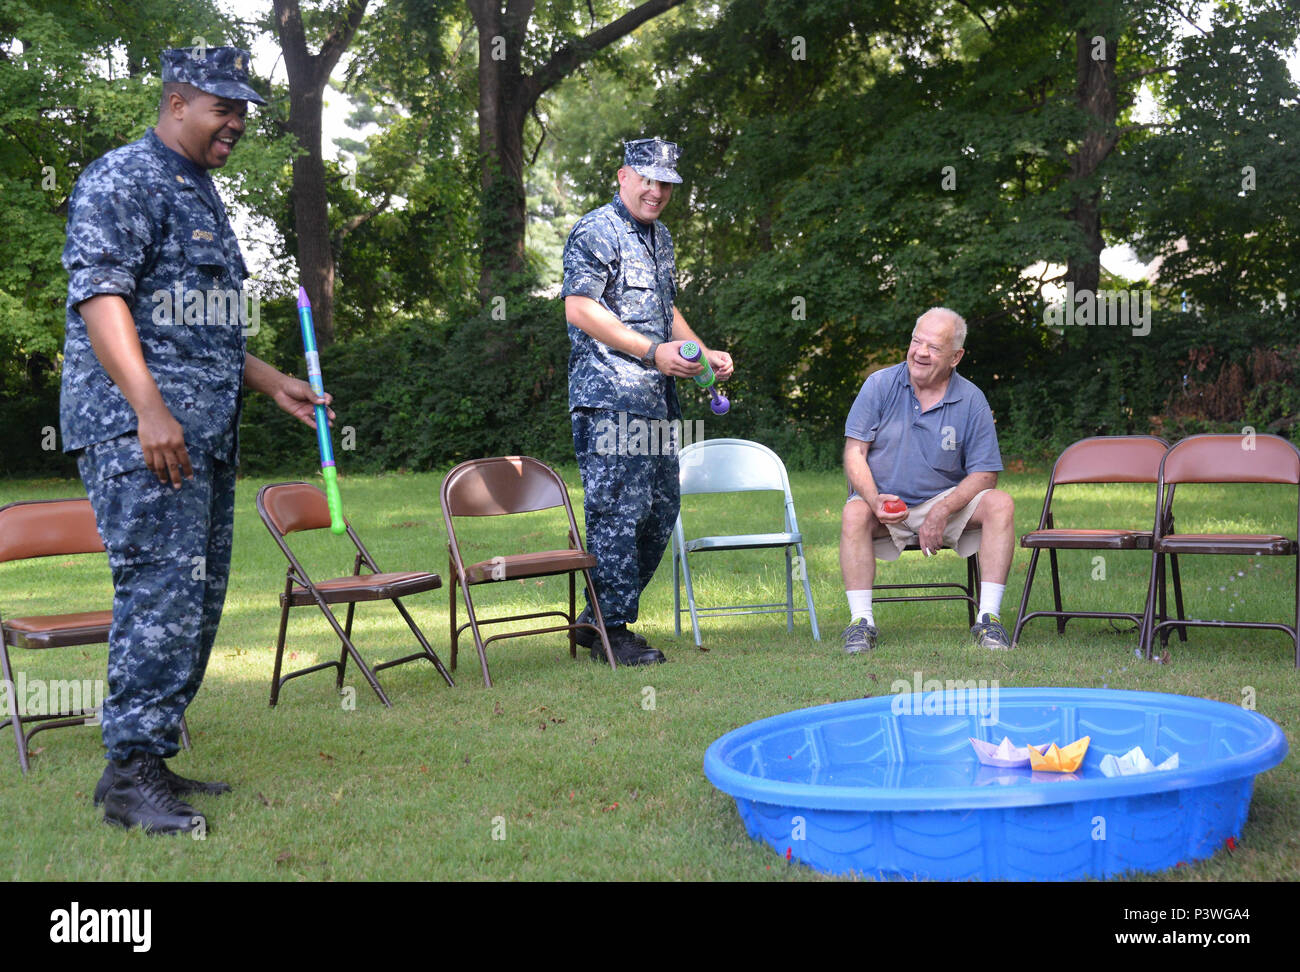 160722-N-FU443-009 NASHVILLE (July 22, 2016) Chief Electrician's Mate (Nuclear) Jeremy Smith, center, and Chief Aviation Boatswain’s Mate (Handling) Mario Johnson, left, assist during an outdoor game where residents attempted to sink paper battleships with squirt guns and water balloons at the Azalea Trace Assisted Living facility. Several members of Navy Recruiting District Nashville volunteered for the event in order to reach out to local members of the community. (U.S. Navy photo by Mass Communication Specialist 1st Class Timothy Walter/Released) Stock Photo